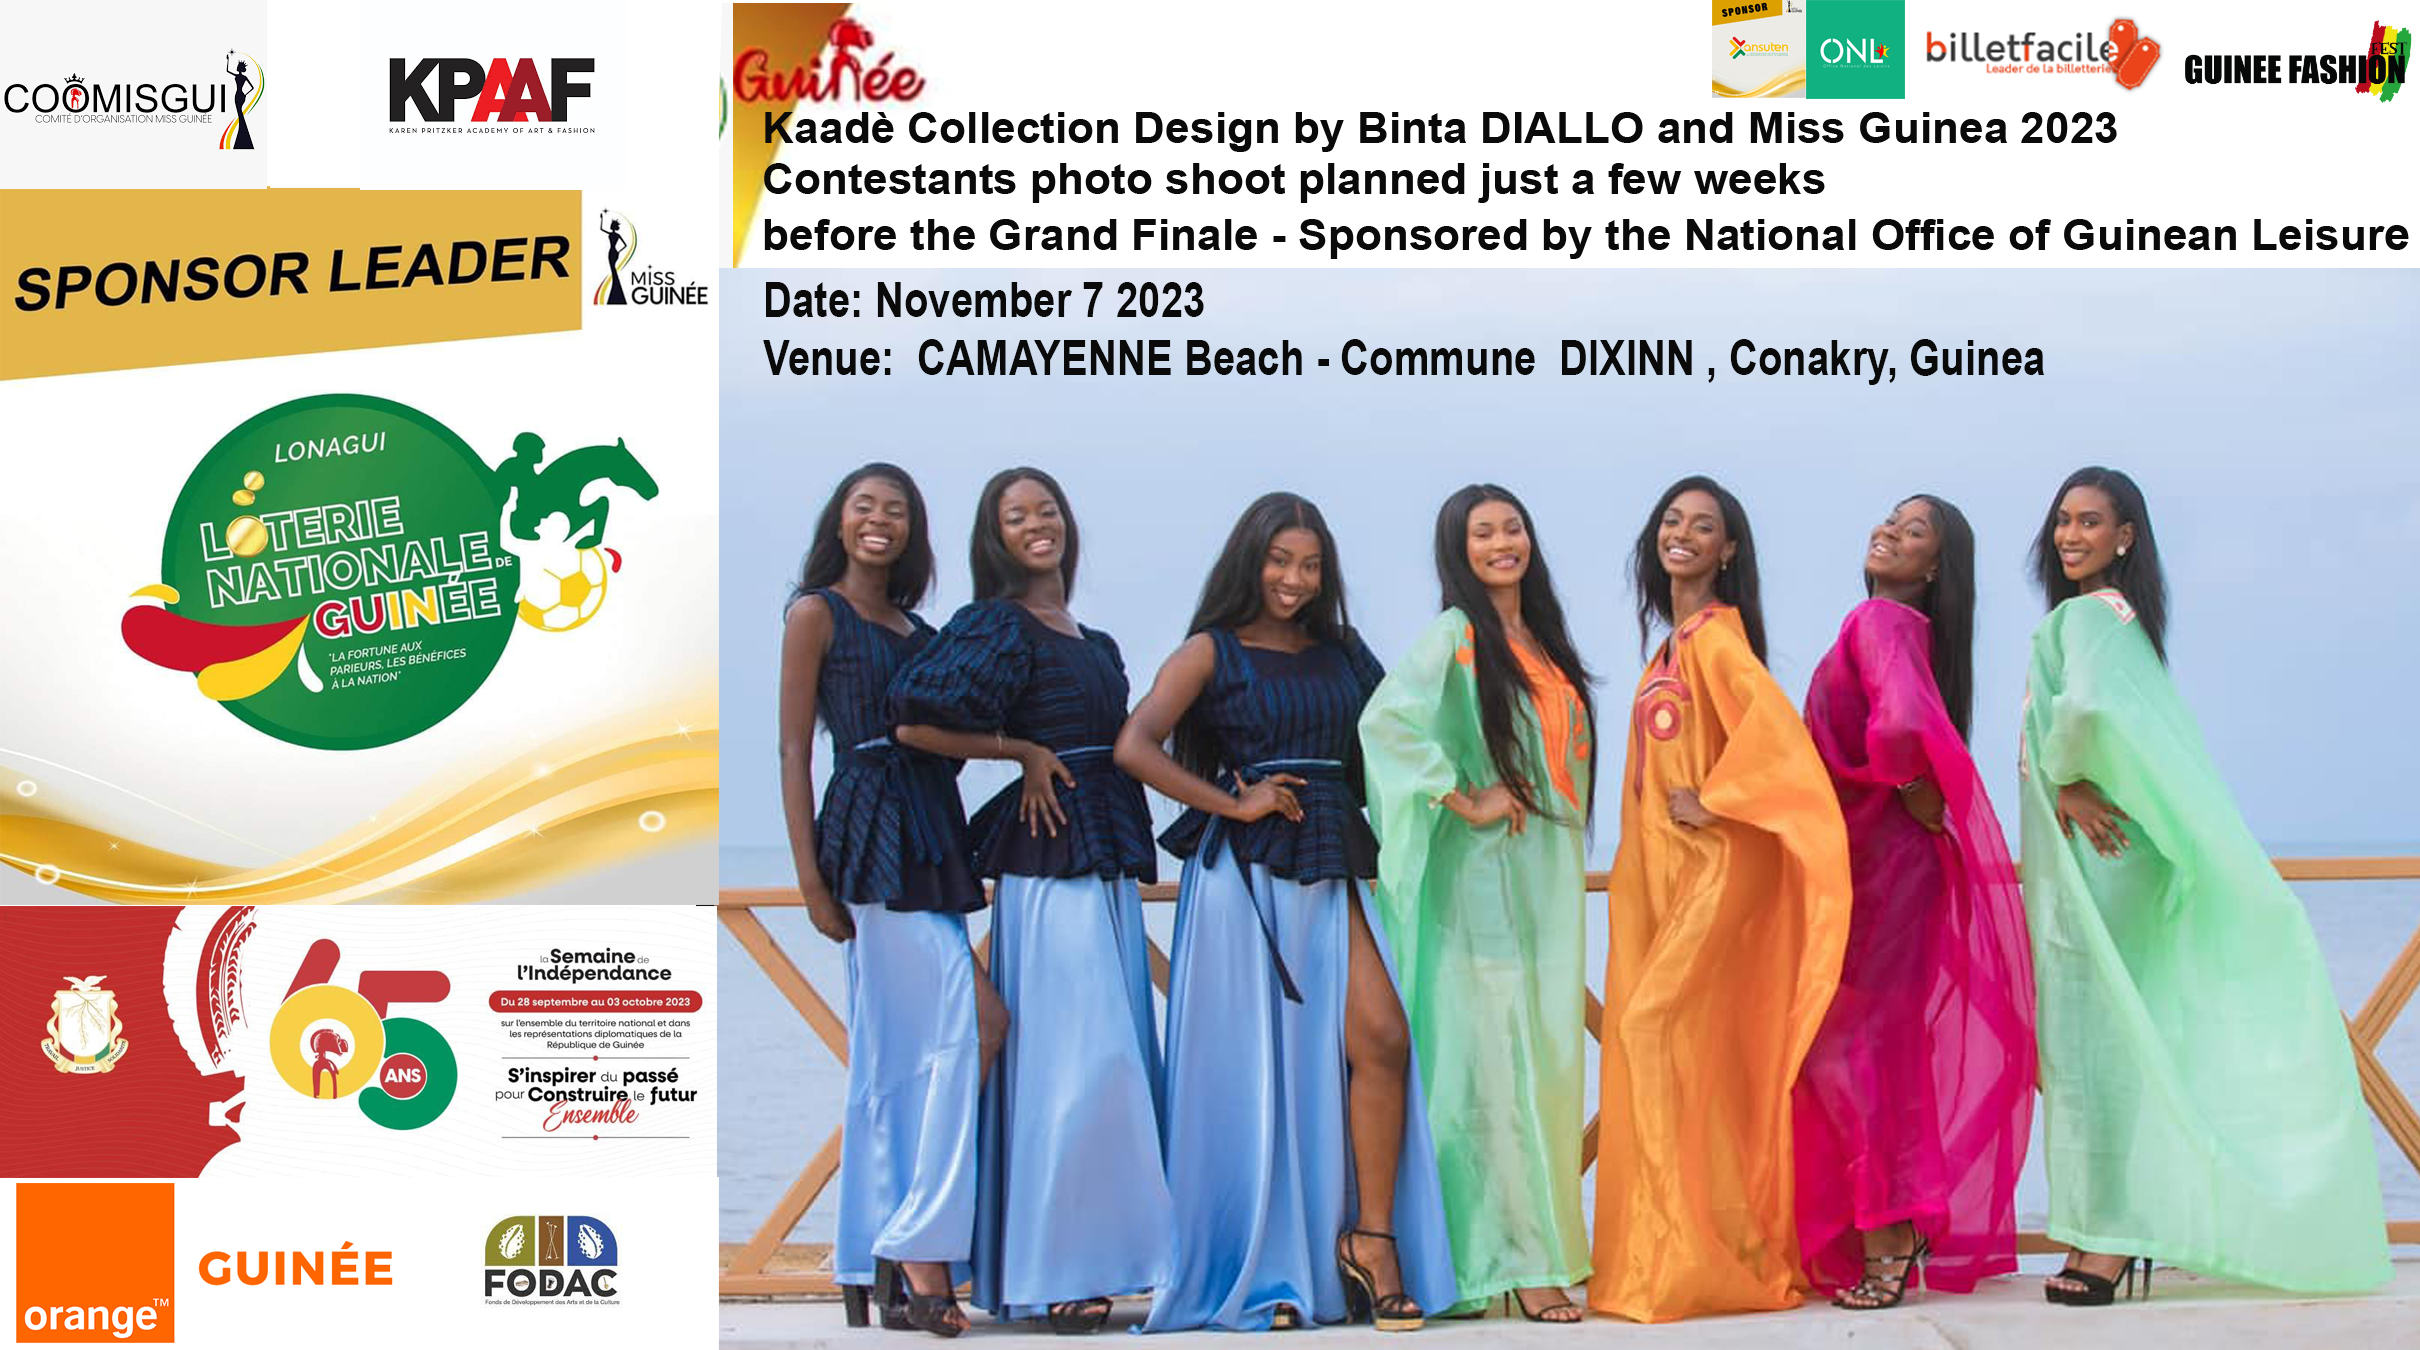 Kaadè Collection Design by Binta DIALLO and Miss Guinea 2023 Contestants  photo shoot planned just a few weeks before the Grand Finale – Sponsored by the National Office of Guinean Leisure